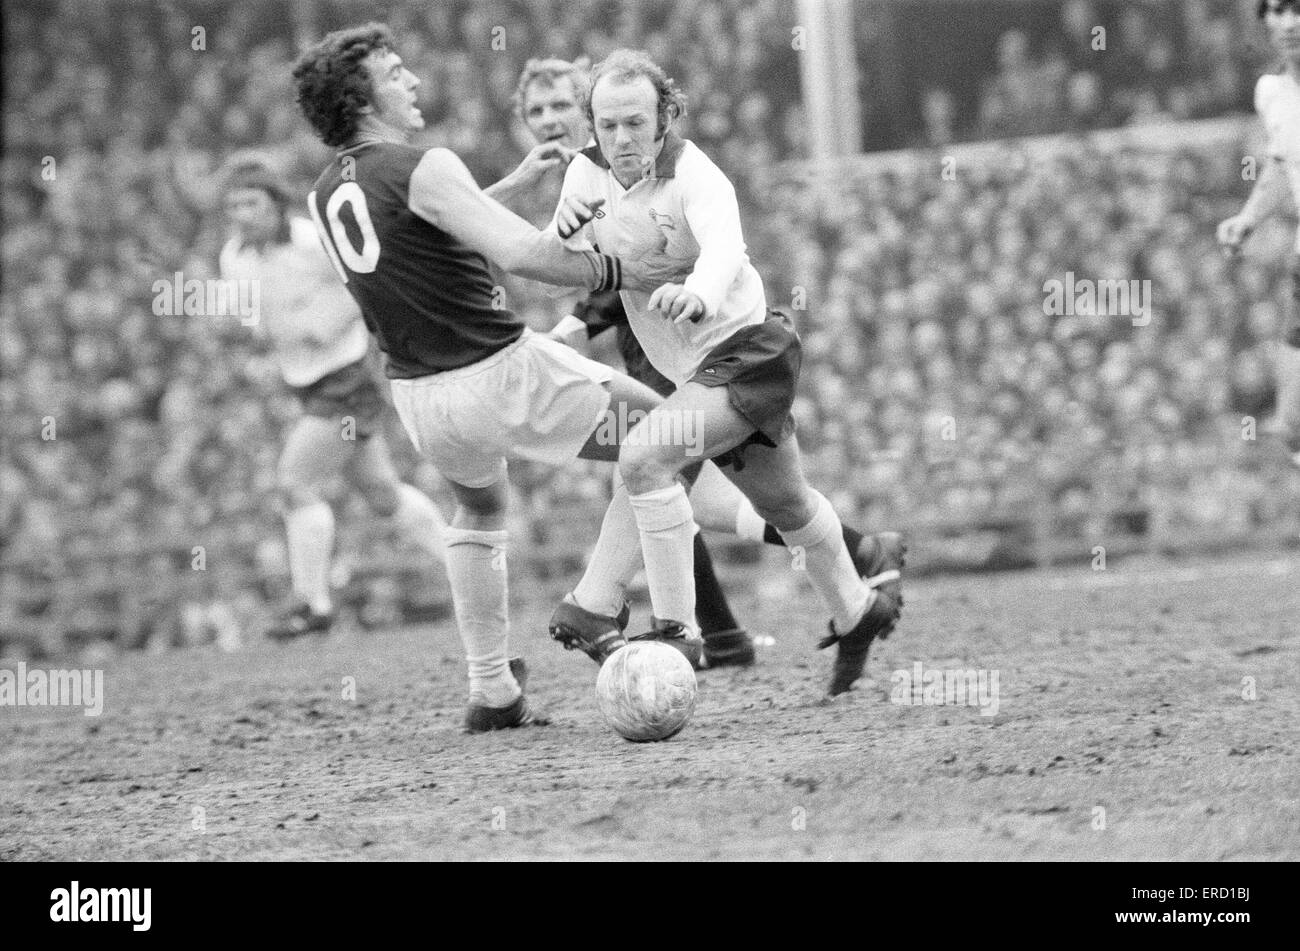 English League Division One match. League Division One match at the Baseball Ground. Derby County 1 v West Ham United 0. Archie Gemmill of Derby battles with Trevor Brooking.  13th April 1975. Stock Photo